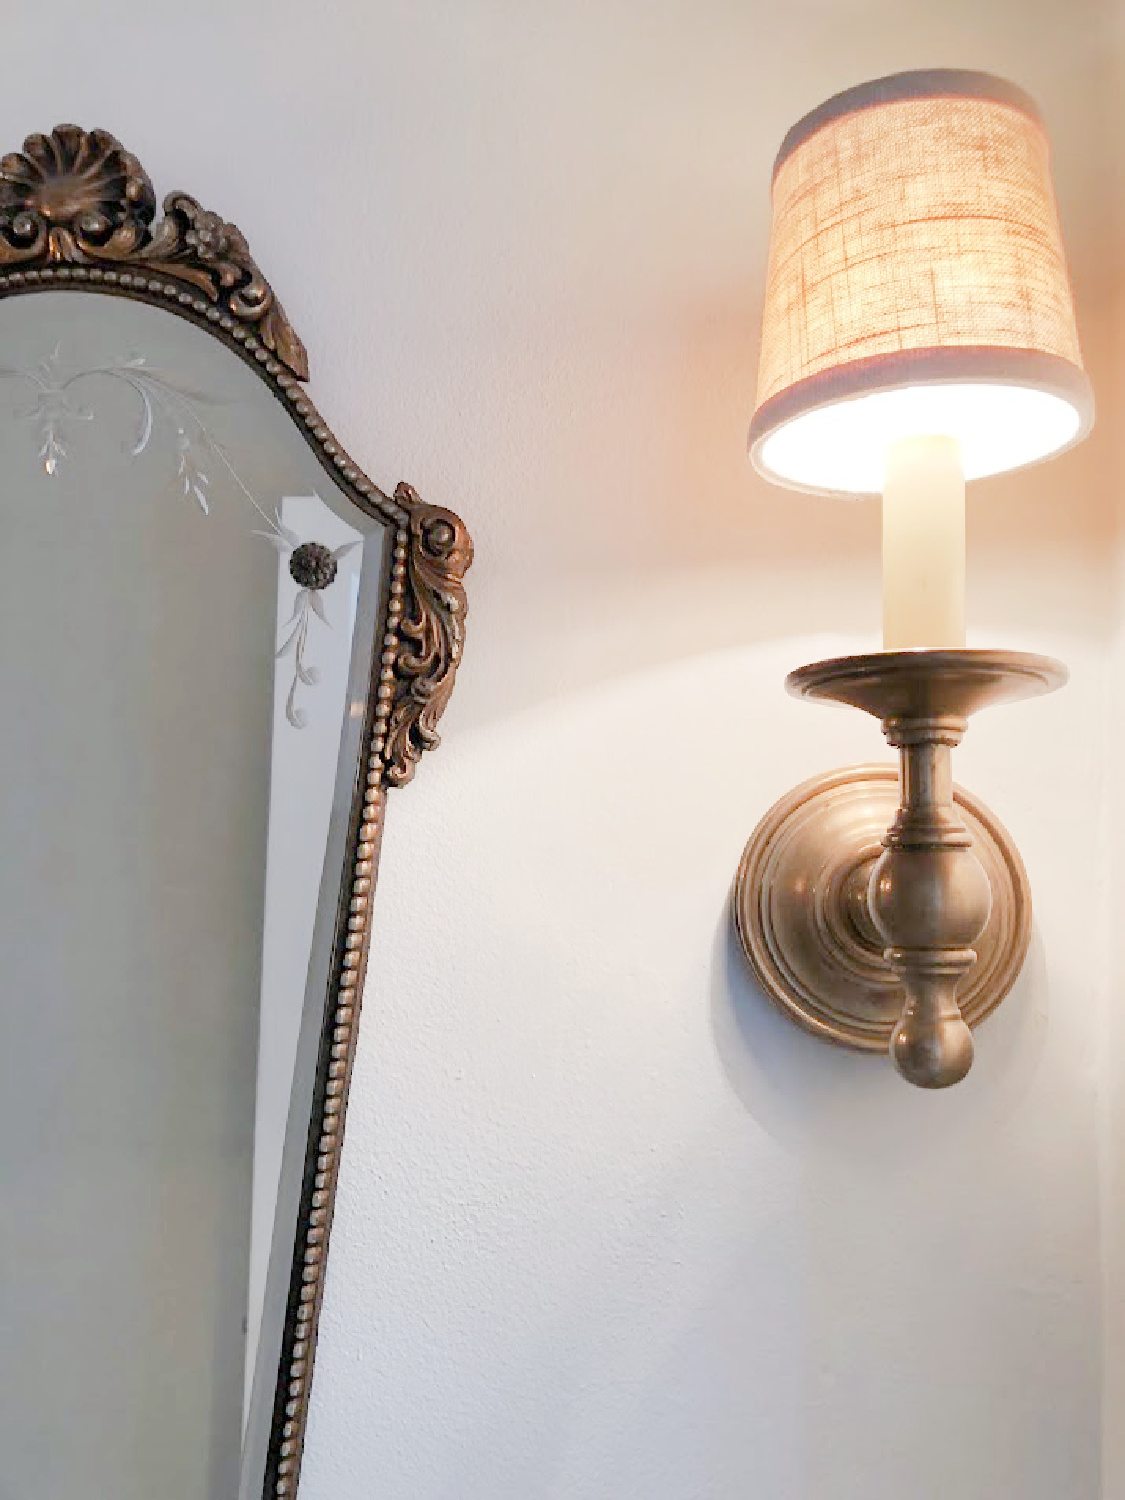 Vintage mirror and antique brass sconce in renovated powder bath - Hello Lovely Studio.